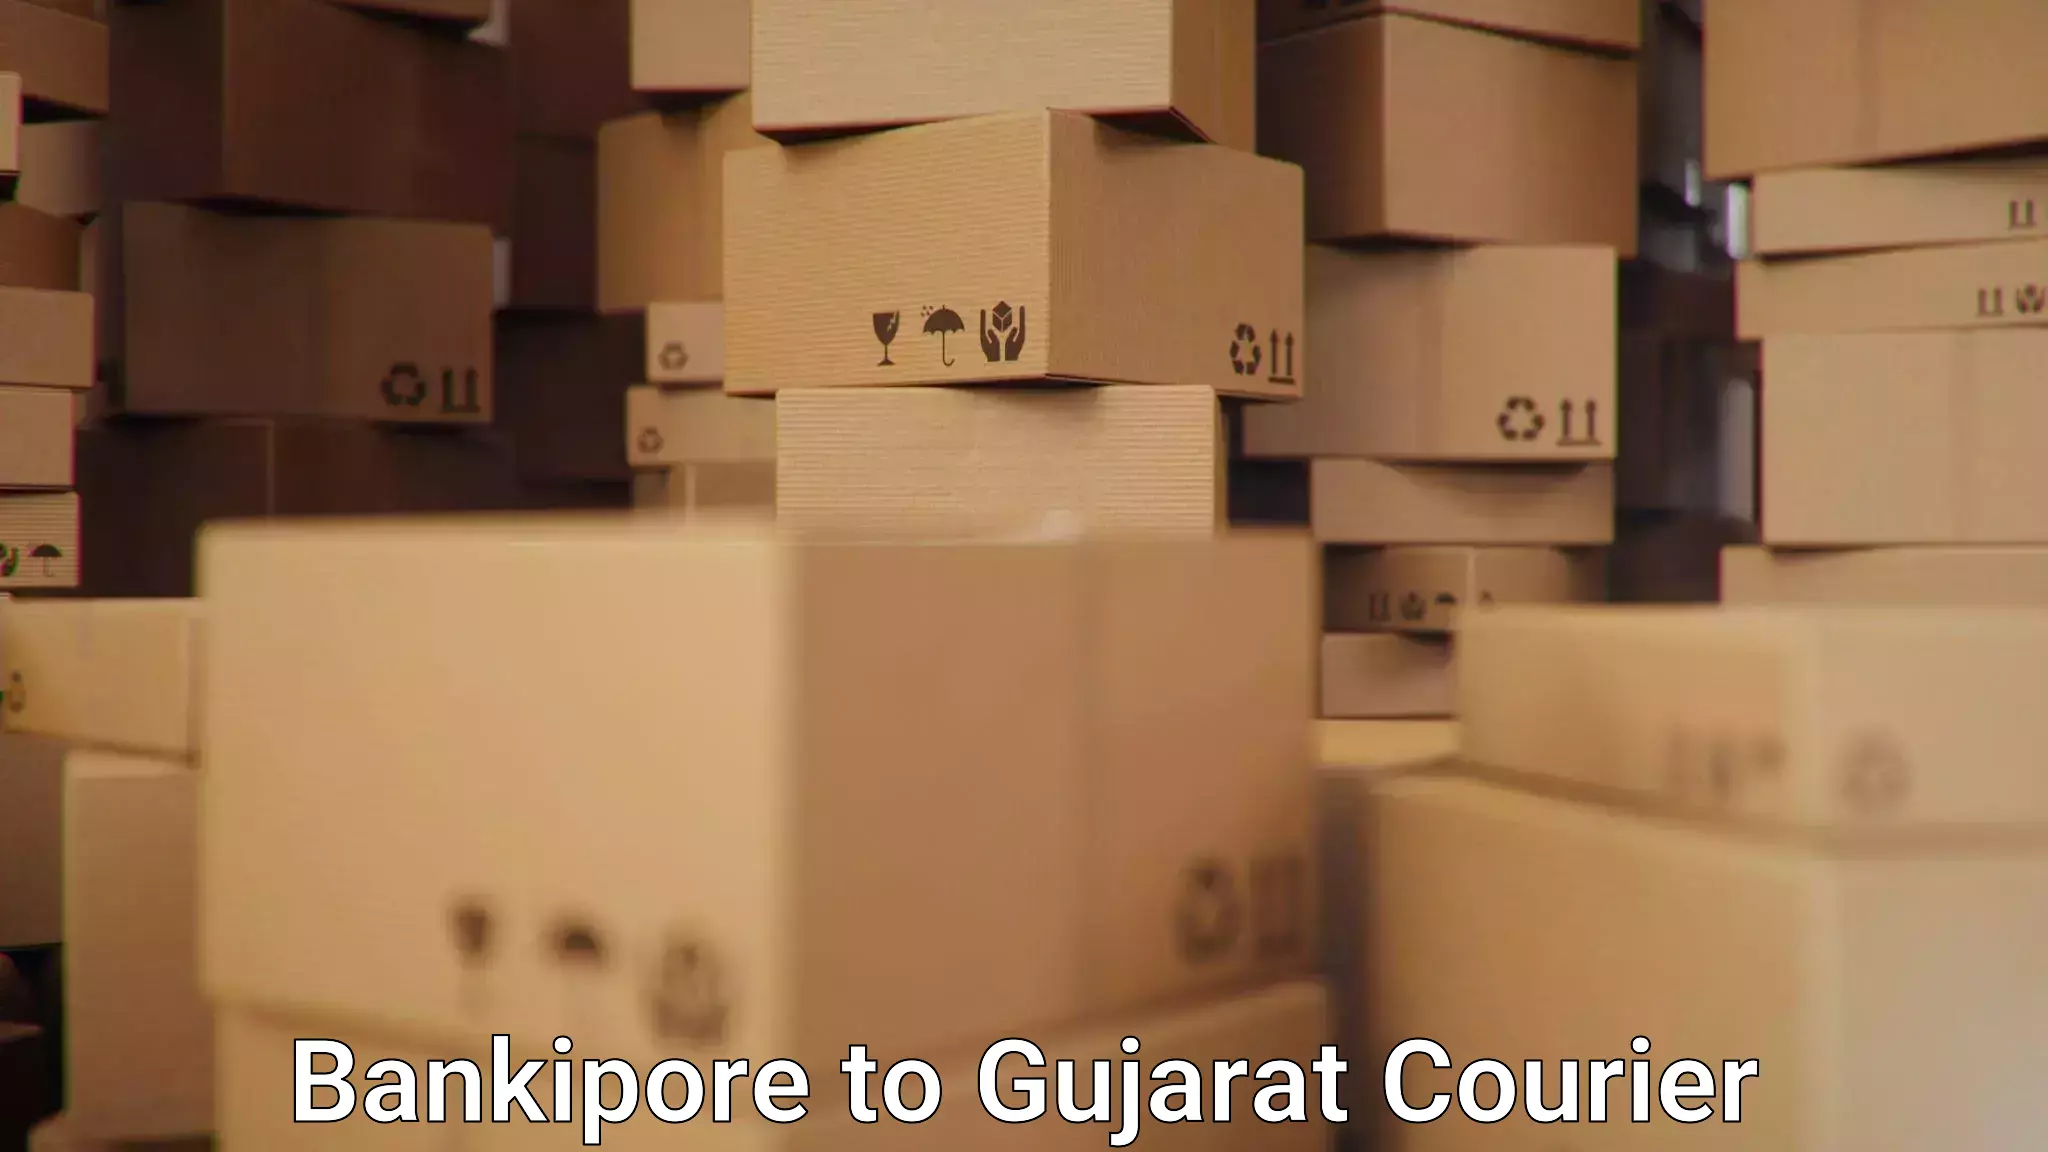 International courier networks Bankipore to Rajpipla